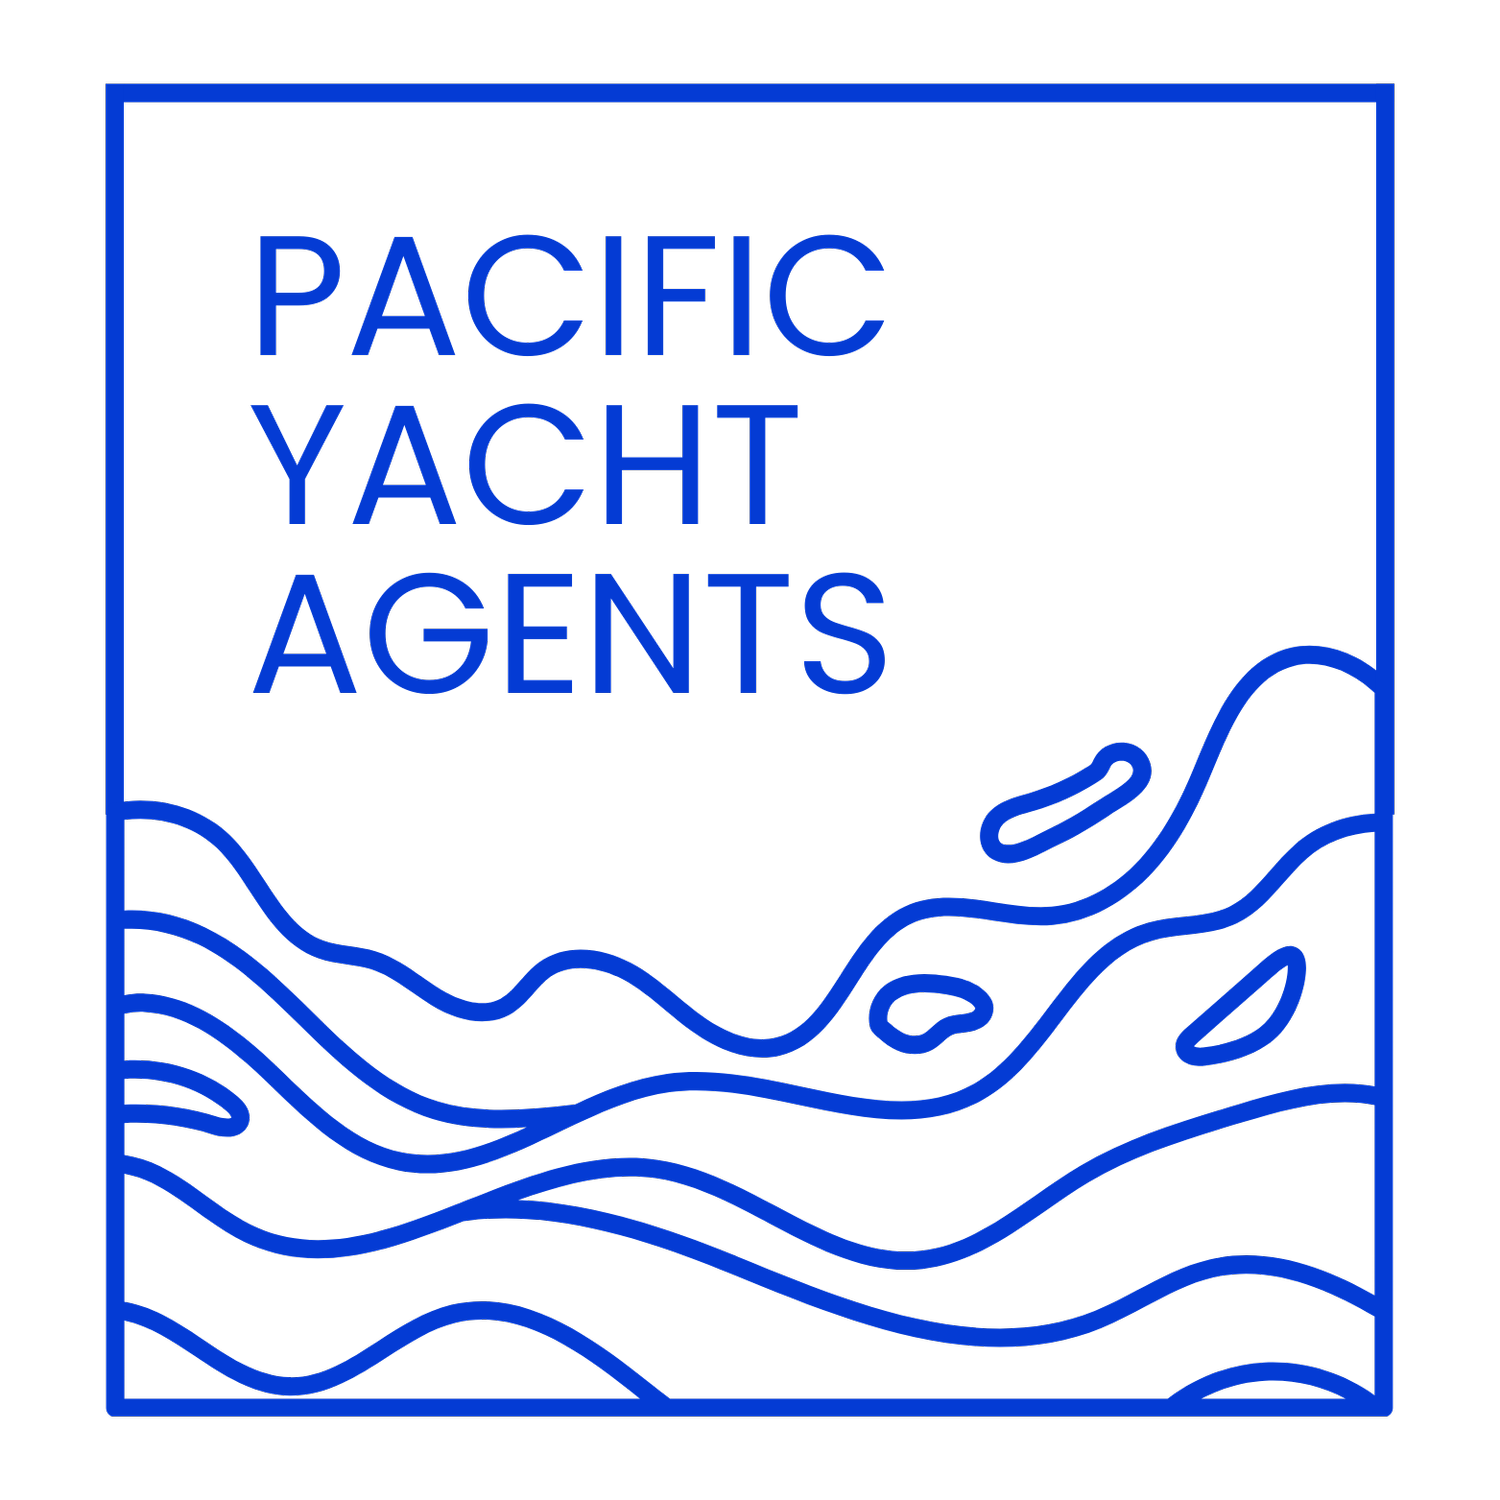 PACIFIC YACHT AGENTS